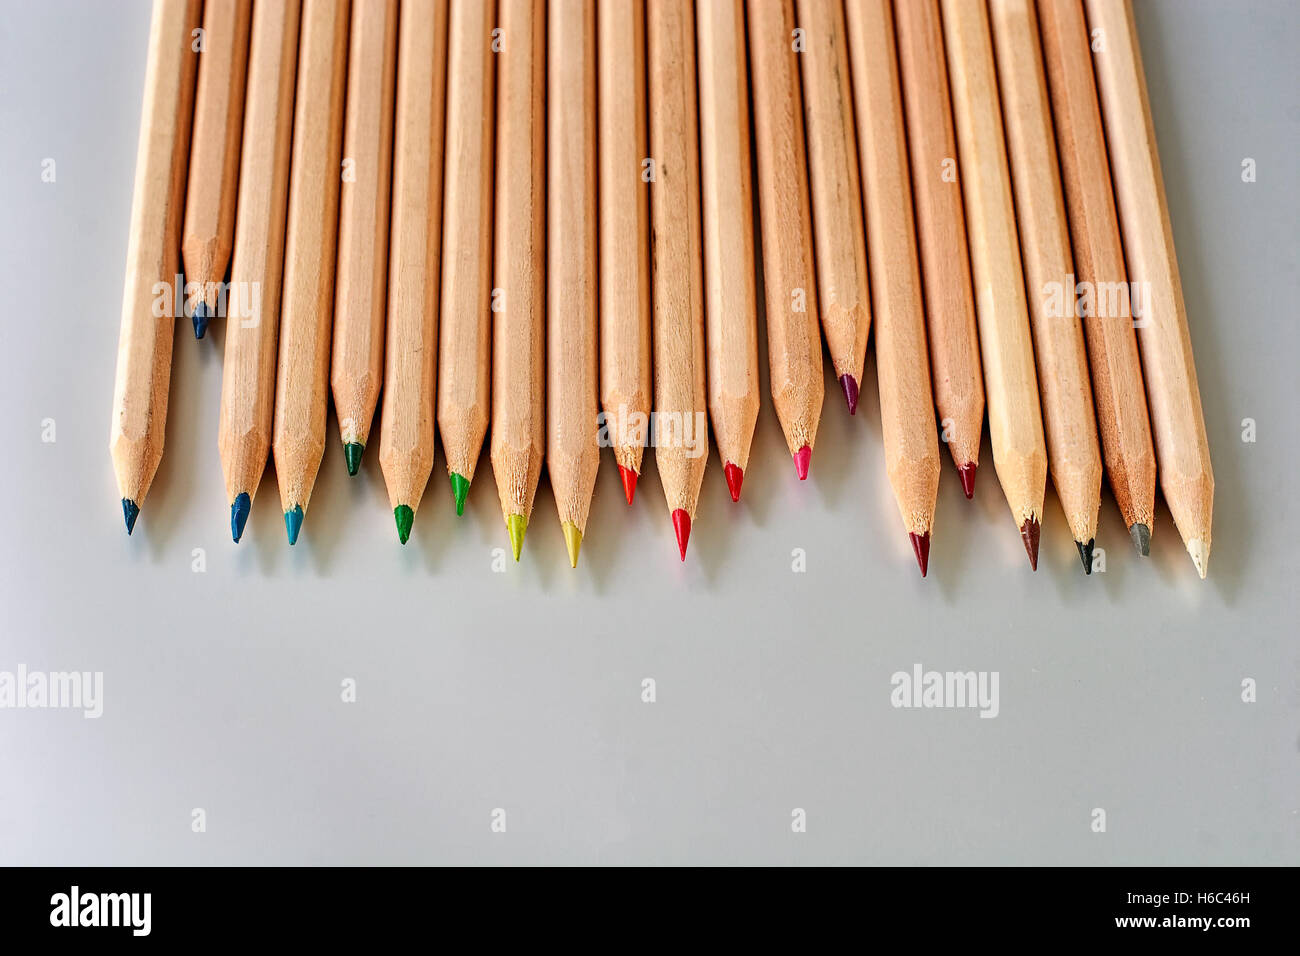 Staggered row of natural wood color pencils Stock Photo